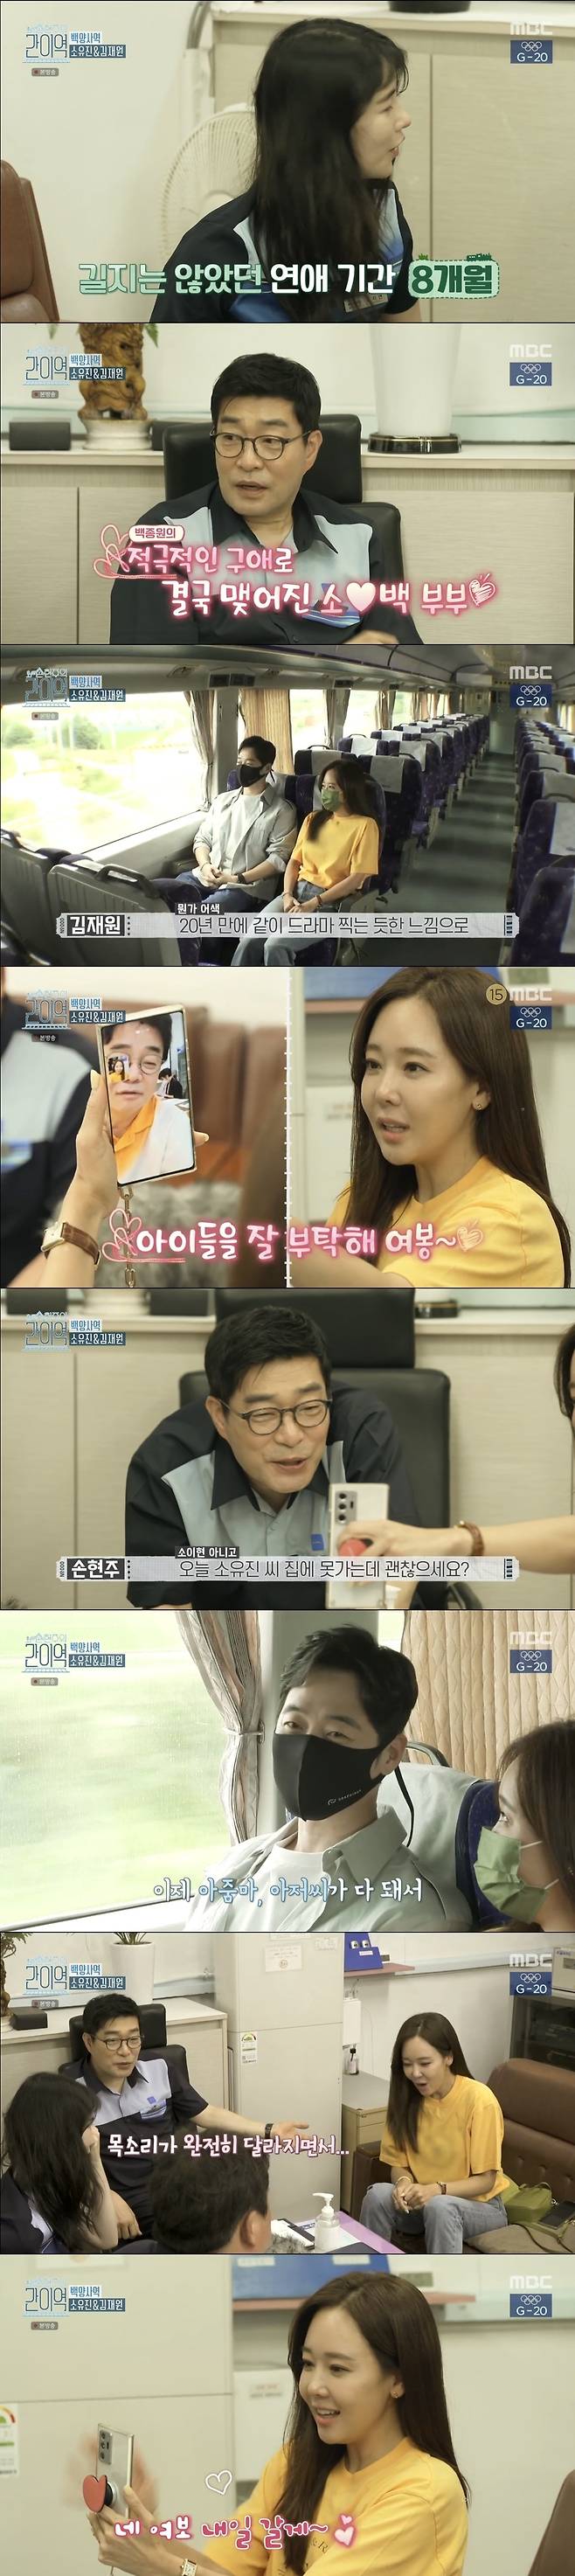 So Yoo-jin reveals her marriage with husband Baek Jong-wonSo Yoo-jin and Kim Jae Won appeared as guests on the MBC entertainment program Son Hyun-joos The liver area Baekyangsa on July 3.The two people who breathed in the SBS drama River in 2000 showed their welcome to the reunion for 20 years.On this day, Lim Ji-yeon asked So Yoo-jin, How much did you love your senior? And So Yoo-jin said eight months.Lim Ji-yeon admired You got marriage soon, and Son Hyun-joo expressed his curiosity: So youve met all eight months?So Yoo-jin said, I met almost without Haru, and then I was very busy with two dramas, when I was performing together. I waited until my husband finished on the set.I waited after the filming and asked me to go to dinner at night. I met Moy Yat without Haru Son Hyun-joo then sympathized, If this happens, it will always be a Gaya atmosphere.Kim Joon-hyun, Lim Ji-yeon and Kim Jae Won shared a genuine story, eating potatoes; all three admired sweet potatoes and a curious purple potato with a chestnut taste.Lim Ji-yeon recalled the residents who had only been away for a month and said, But thats the brightest thing.Kim Joon-hyun said, Youve prepared your mind. My parents correct, but I sometimes think without knowing. What should you do when you die?Where should I do it? When I was a child, I thought about this idea, but now I am more prepared for my heart. Kim Jae Won said, I have been dead since I was a child, so I went to the funeral hall more than 20 times a year.I went too often, so at some point I thought I would go when I was there, and I thought it was something I had to face when I had time. Kim Joon-hyun reflected that I think I should always make my parents live, but when I look at my face, I tick. Kim Jae Won also sympathized with I do not do it to my parents because I make others and my father live.Lim Ji-yeon also turned to himself, listening to the two.Lim Ji-yeon told Sooo-jin, When the performers come and enjoy The liver area, they think that babies are very much.He said he wanted to bring the children, So Yoo-jin said, We have taken so much that I want to think about me today.I am so glad that my husband is busy and I have a rest day. Son Hyun-joo, who was cleaning Guddu, said: The more I think about it while cleaning Guddu, the more I see Mr. Baek Jong-won, who loves his wife, its not easy.So Yoo-jin also spoke to Mr. Baek Jong-won, so his voice changed. I was surprised.I hope you will be so beautiful and loving you. I like Mr. Baek Jong-won, so there is such a wind.Kim Jae Won is also a person who had a time in 2000. How can a person take 10 years with a smile? Kim Joon-hyun, Lim Ji-yeon, So Yoo-jin and Kim Jae Won arrived at the Bergica Experience Field.So Yoo-jin said: I dont like this speed.I also sold my car with the third child, and Kim Jae Won - So Yoo-jin, Kim Joon-hyun - Lim Ji-yeon team.